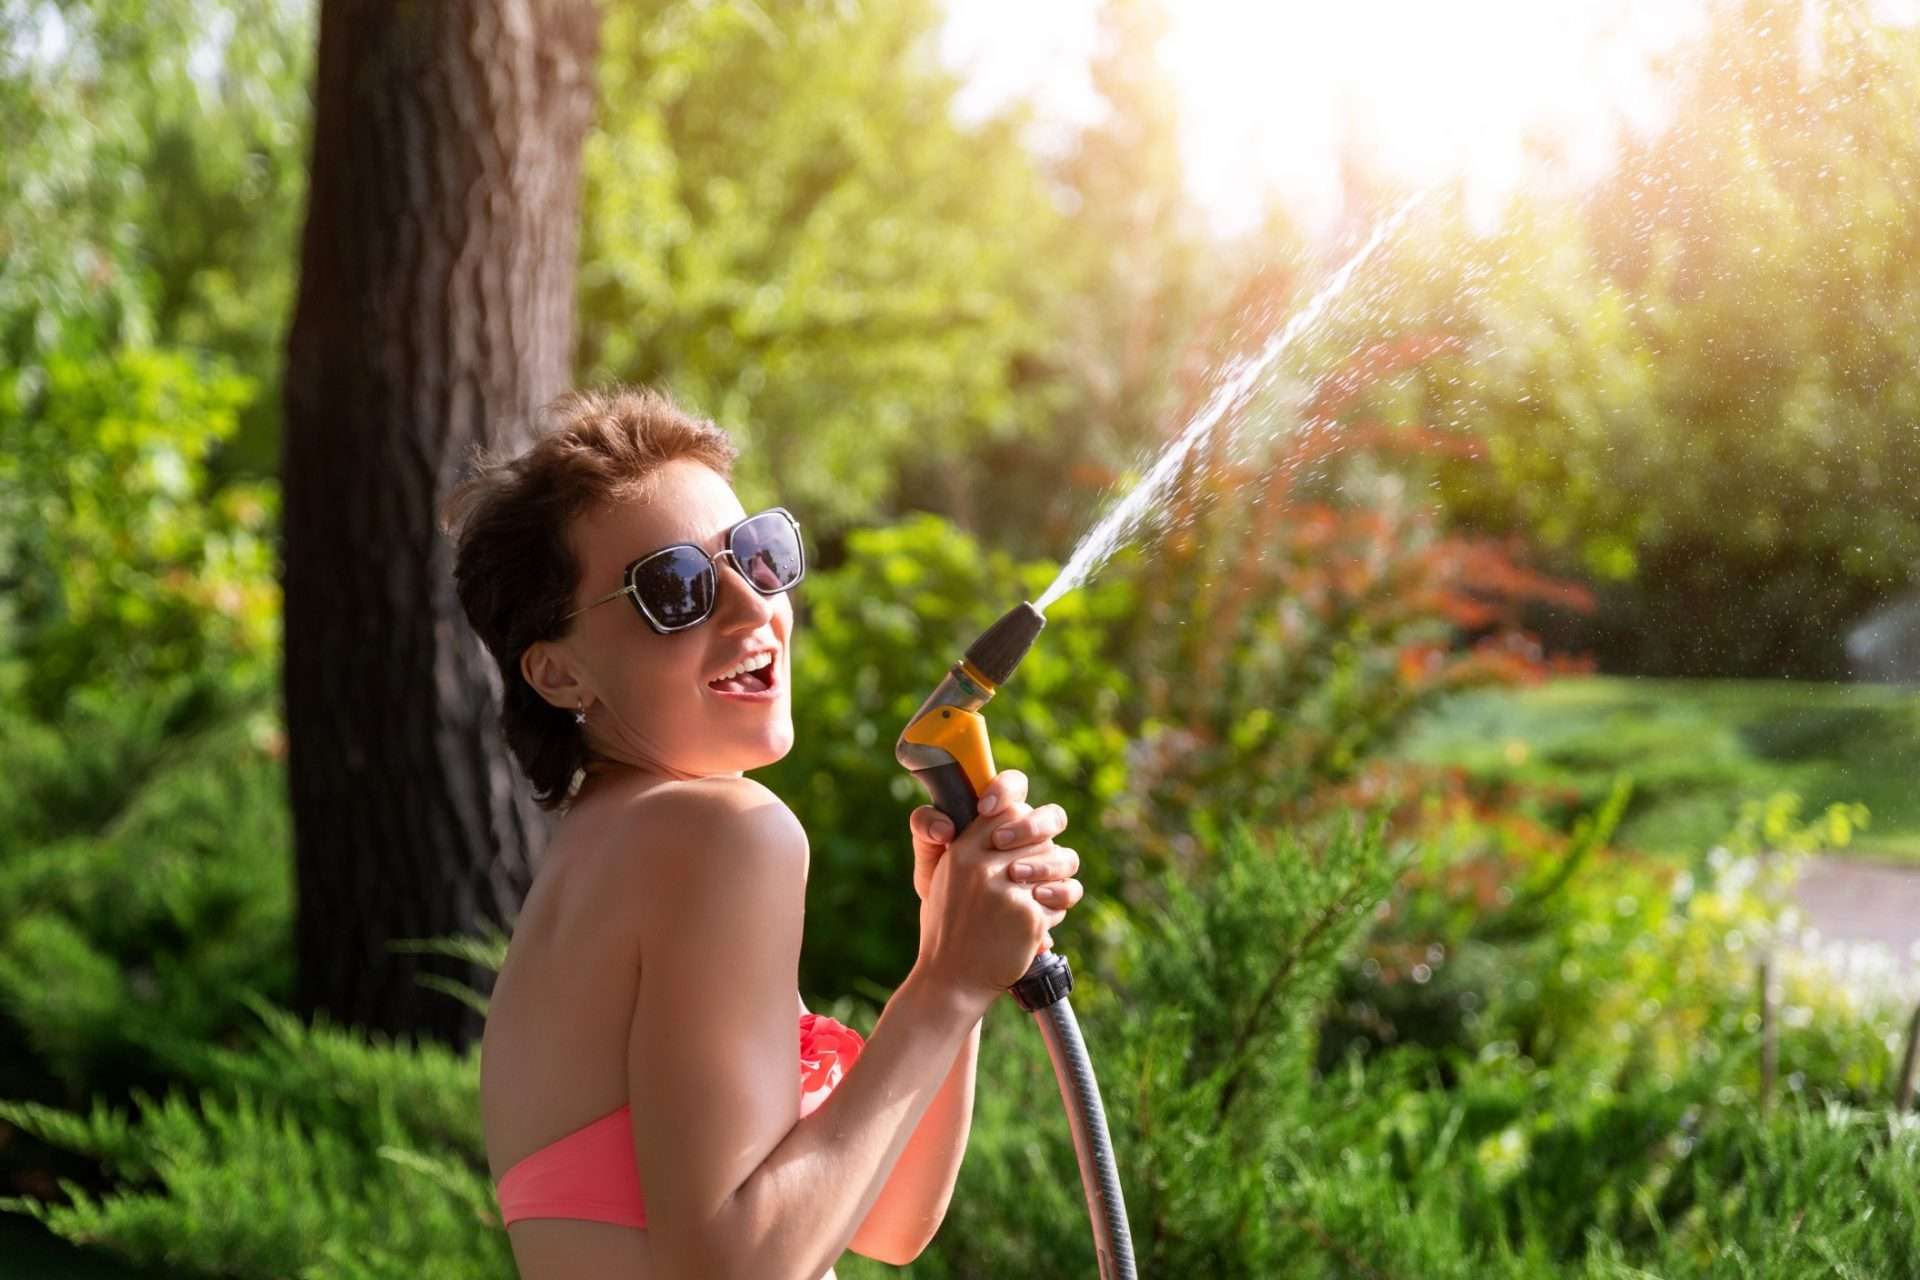 Woman using hose to shower outside